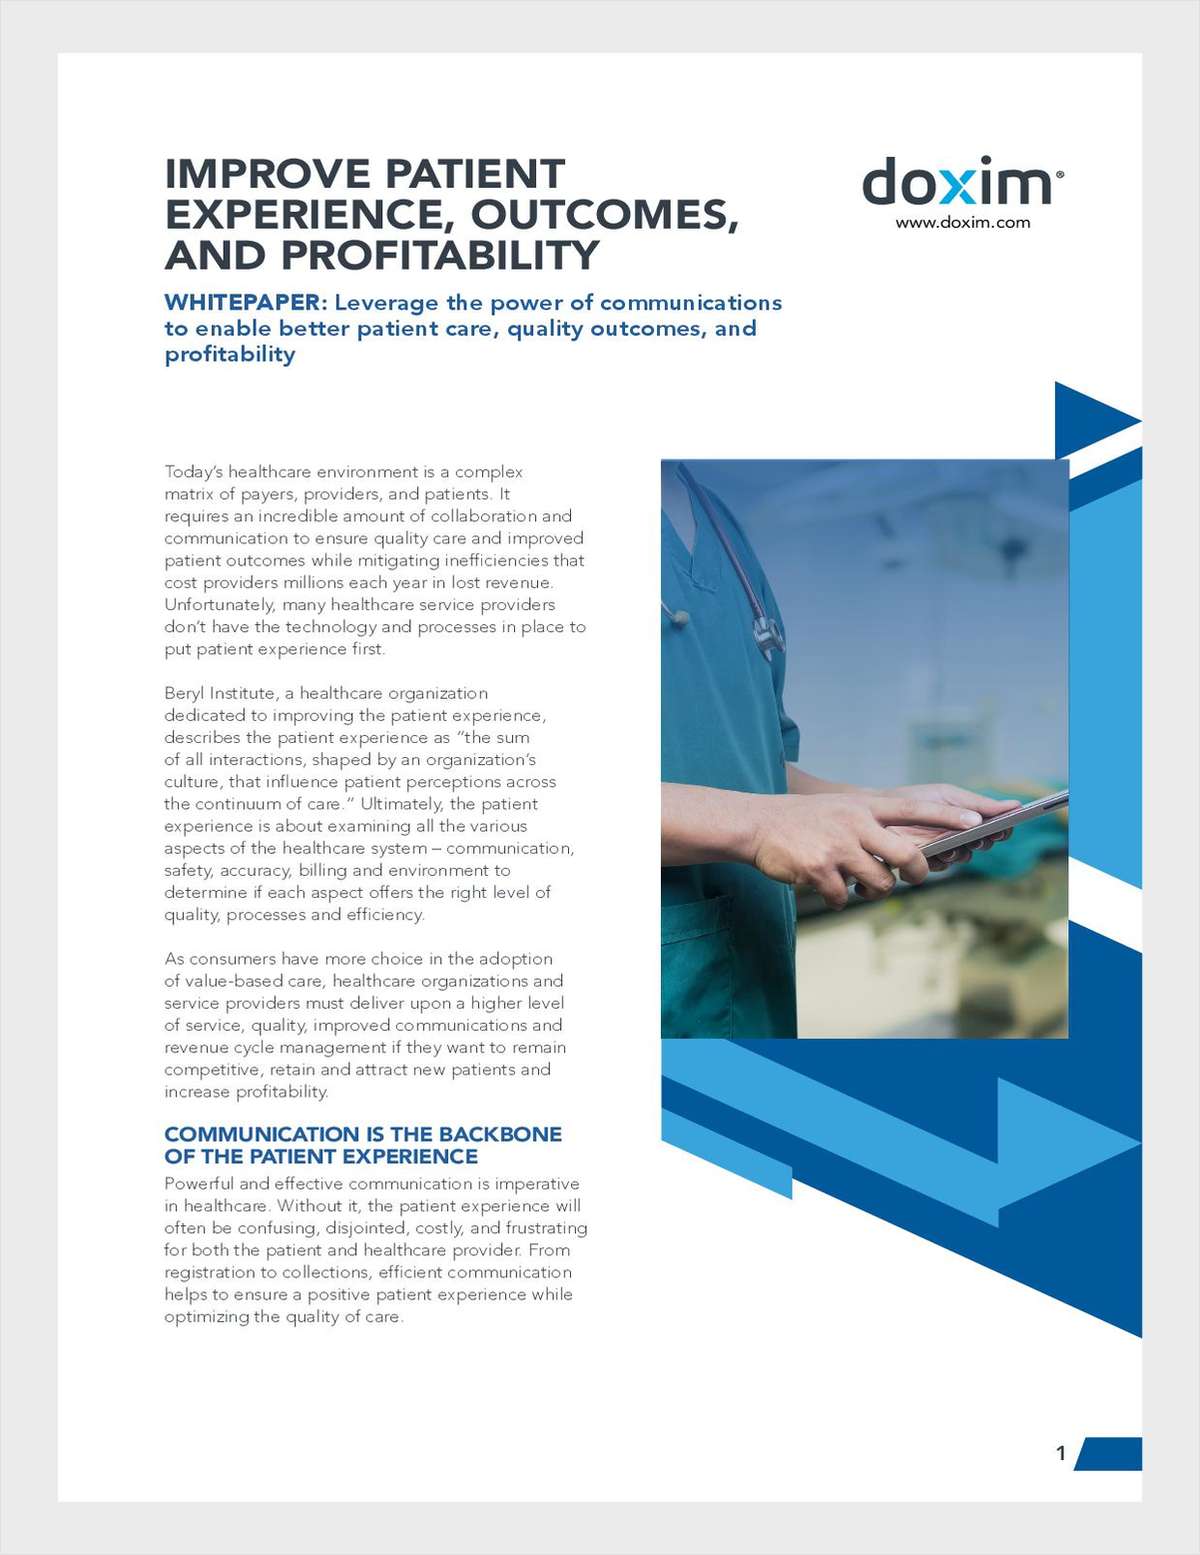 Improve Patient Experience and Outcomes through Communications